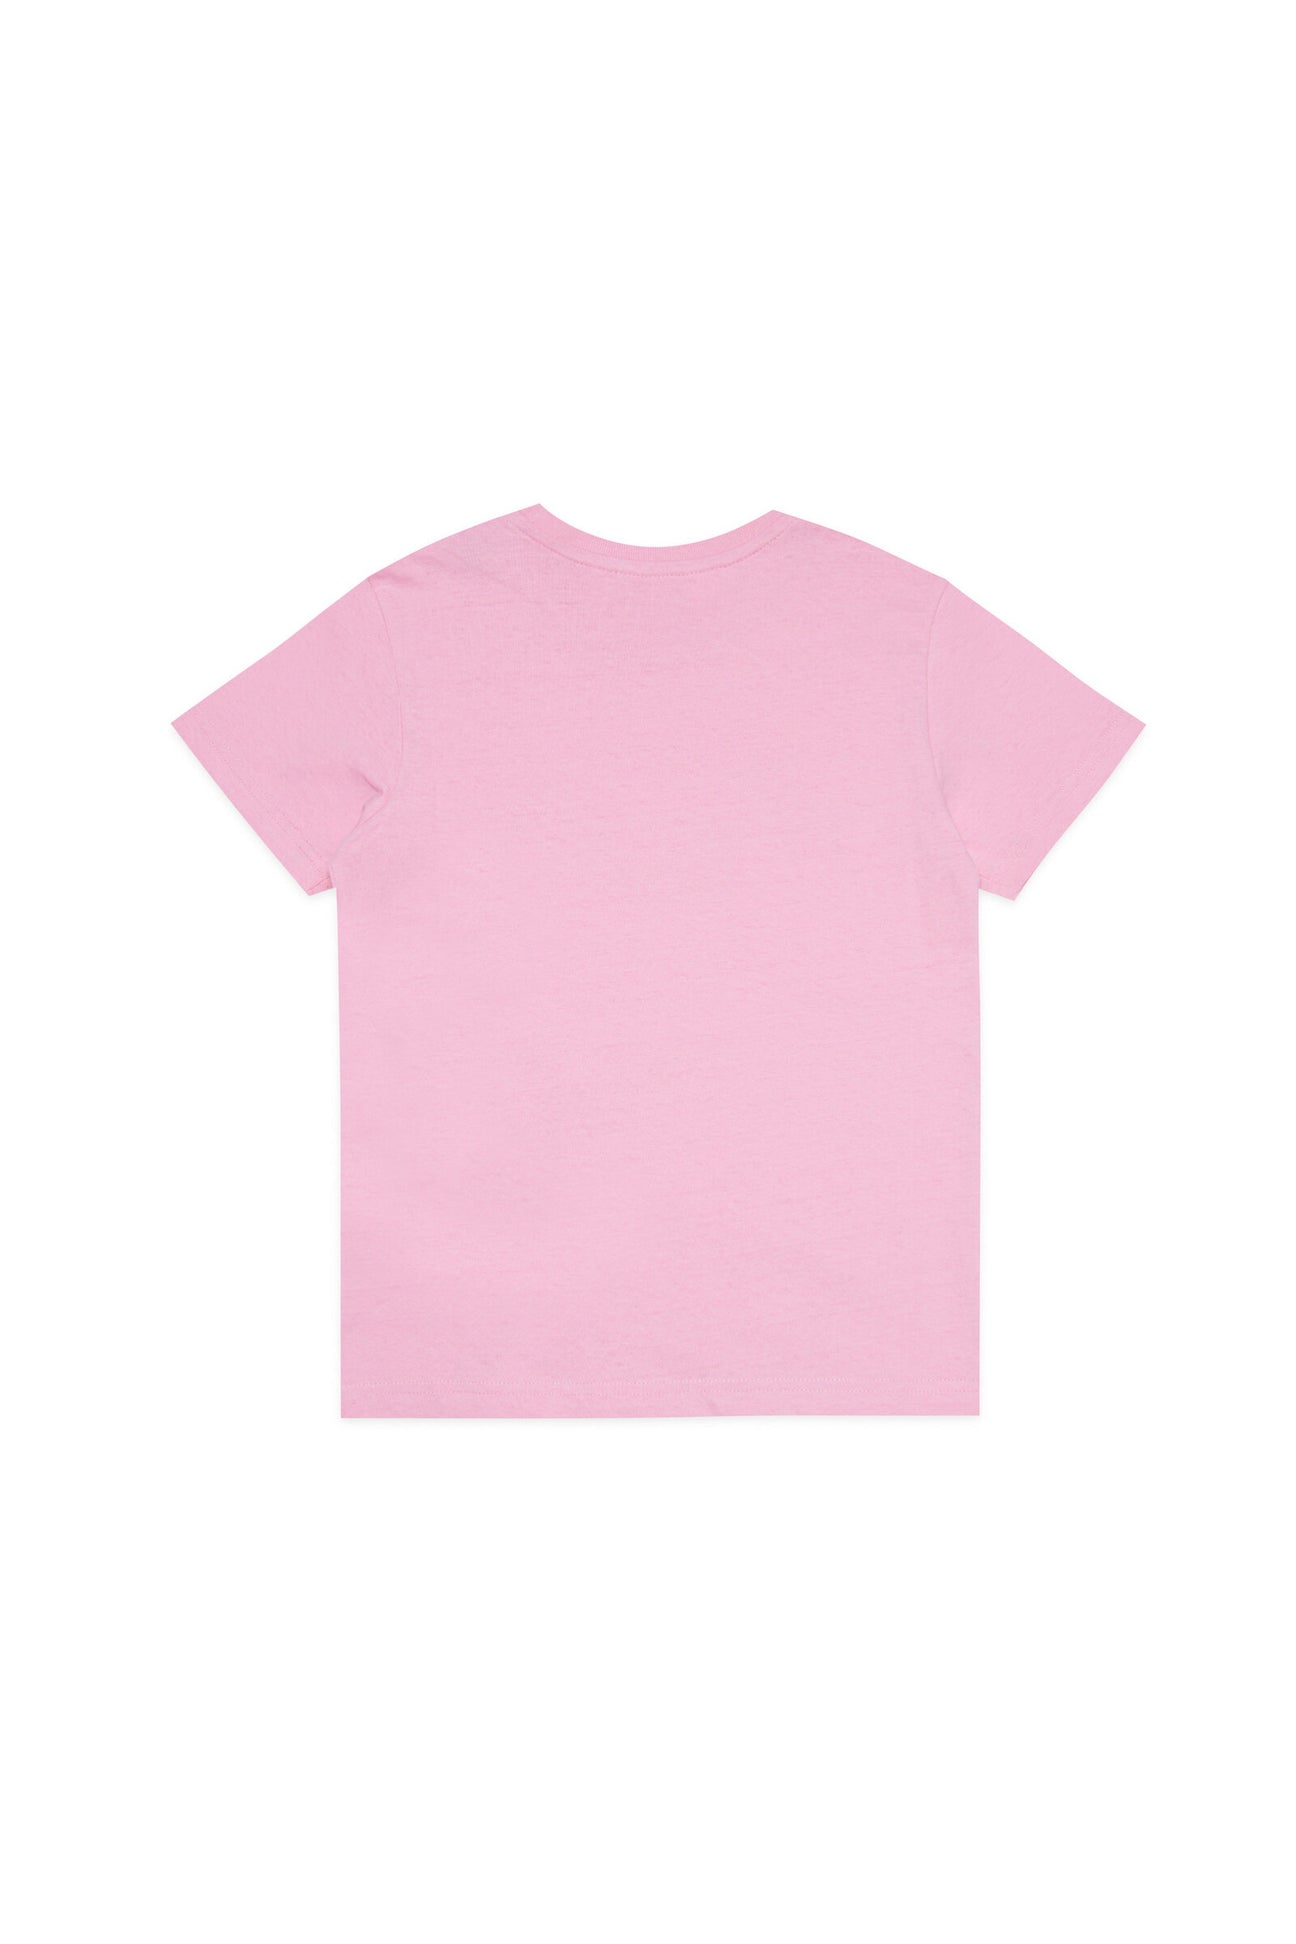 Diesel oversized pastel pink cotton t-shirt with print for children